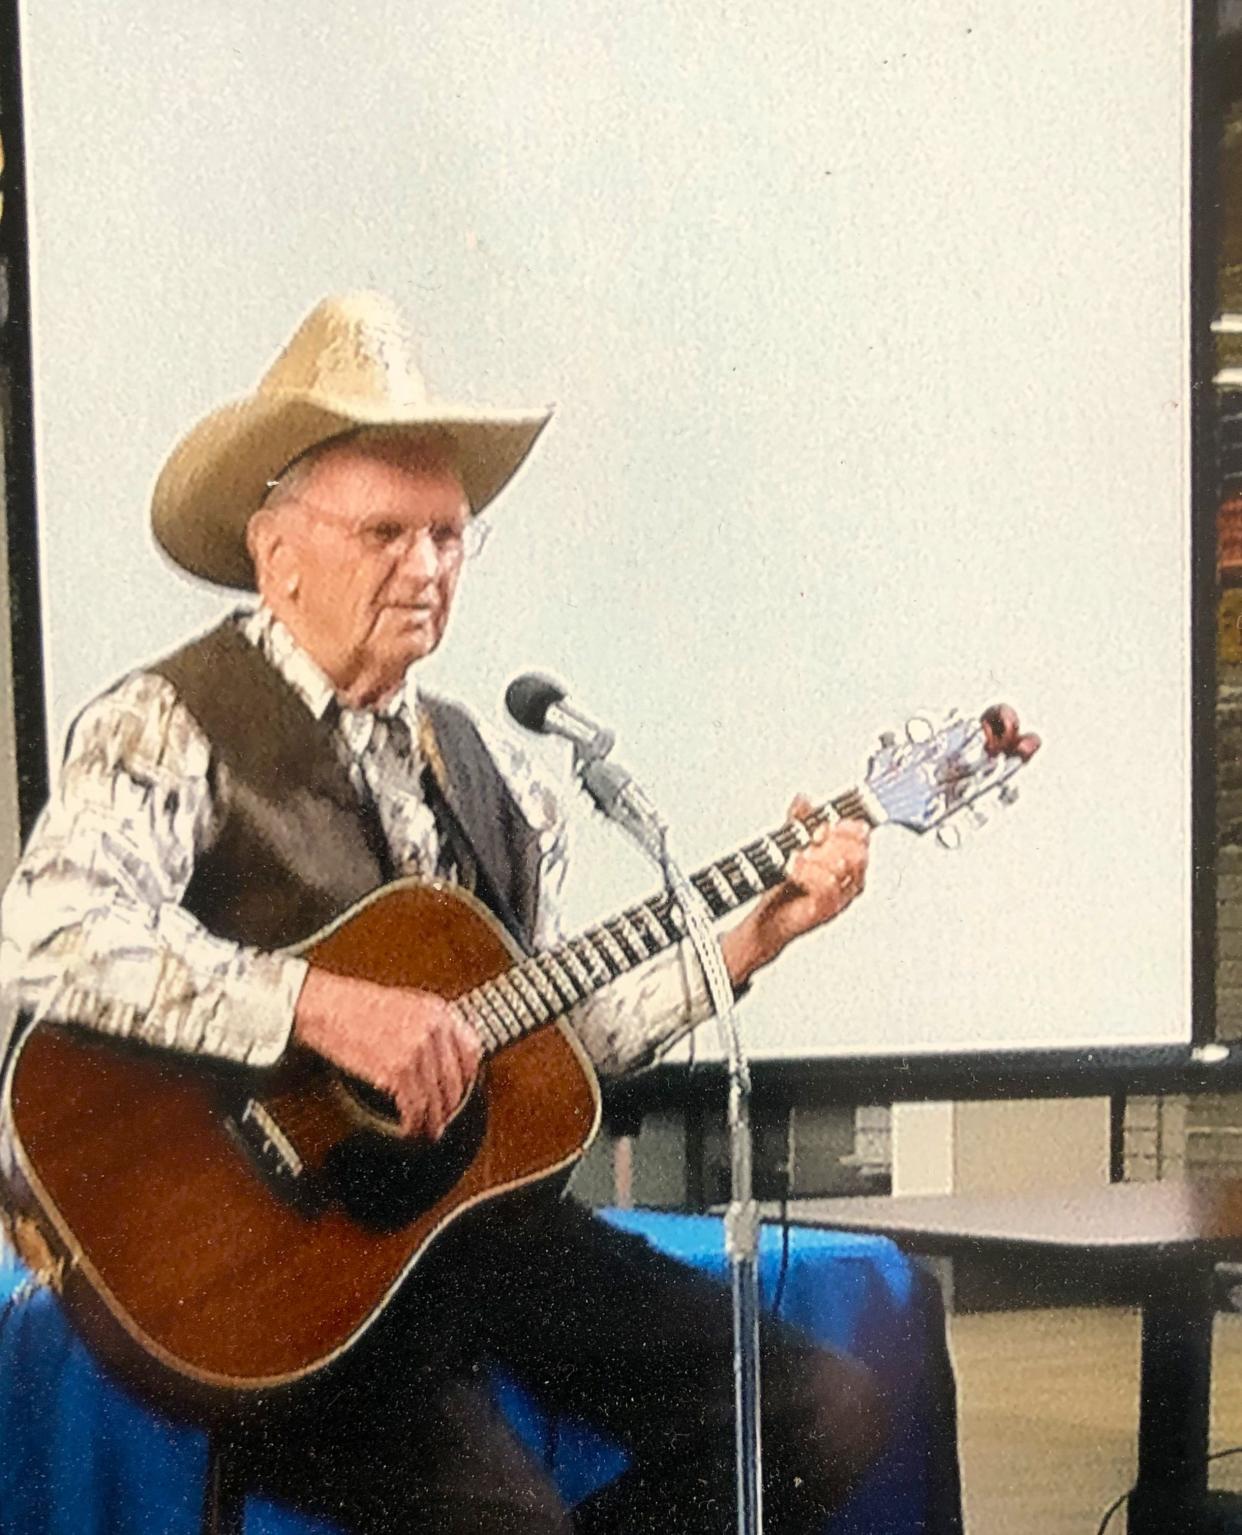 Tom Grono plays the guitar at the Hanover Mall in the 1980s for the fitness walkers. He had an hourlong show of country songs.